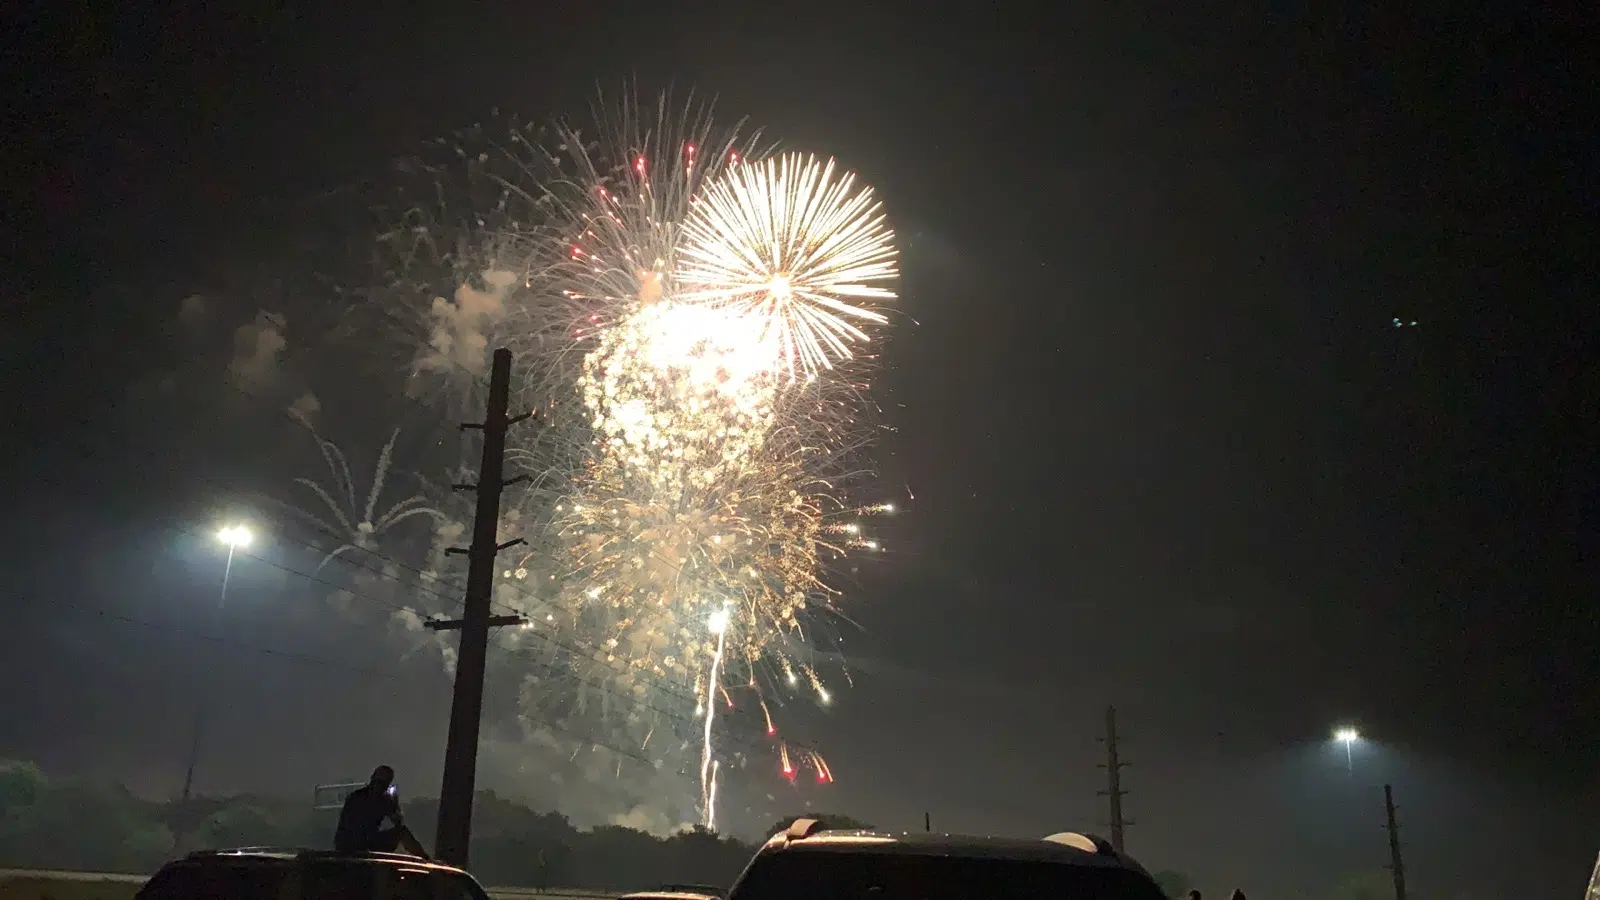 Fireworks displays coming this weekend for Emporia and surrounding communities